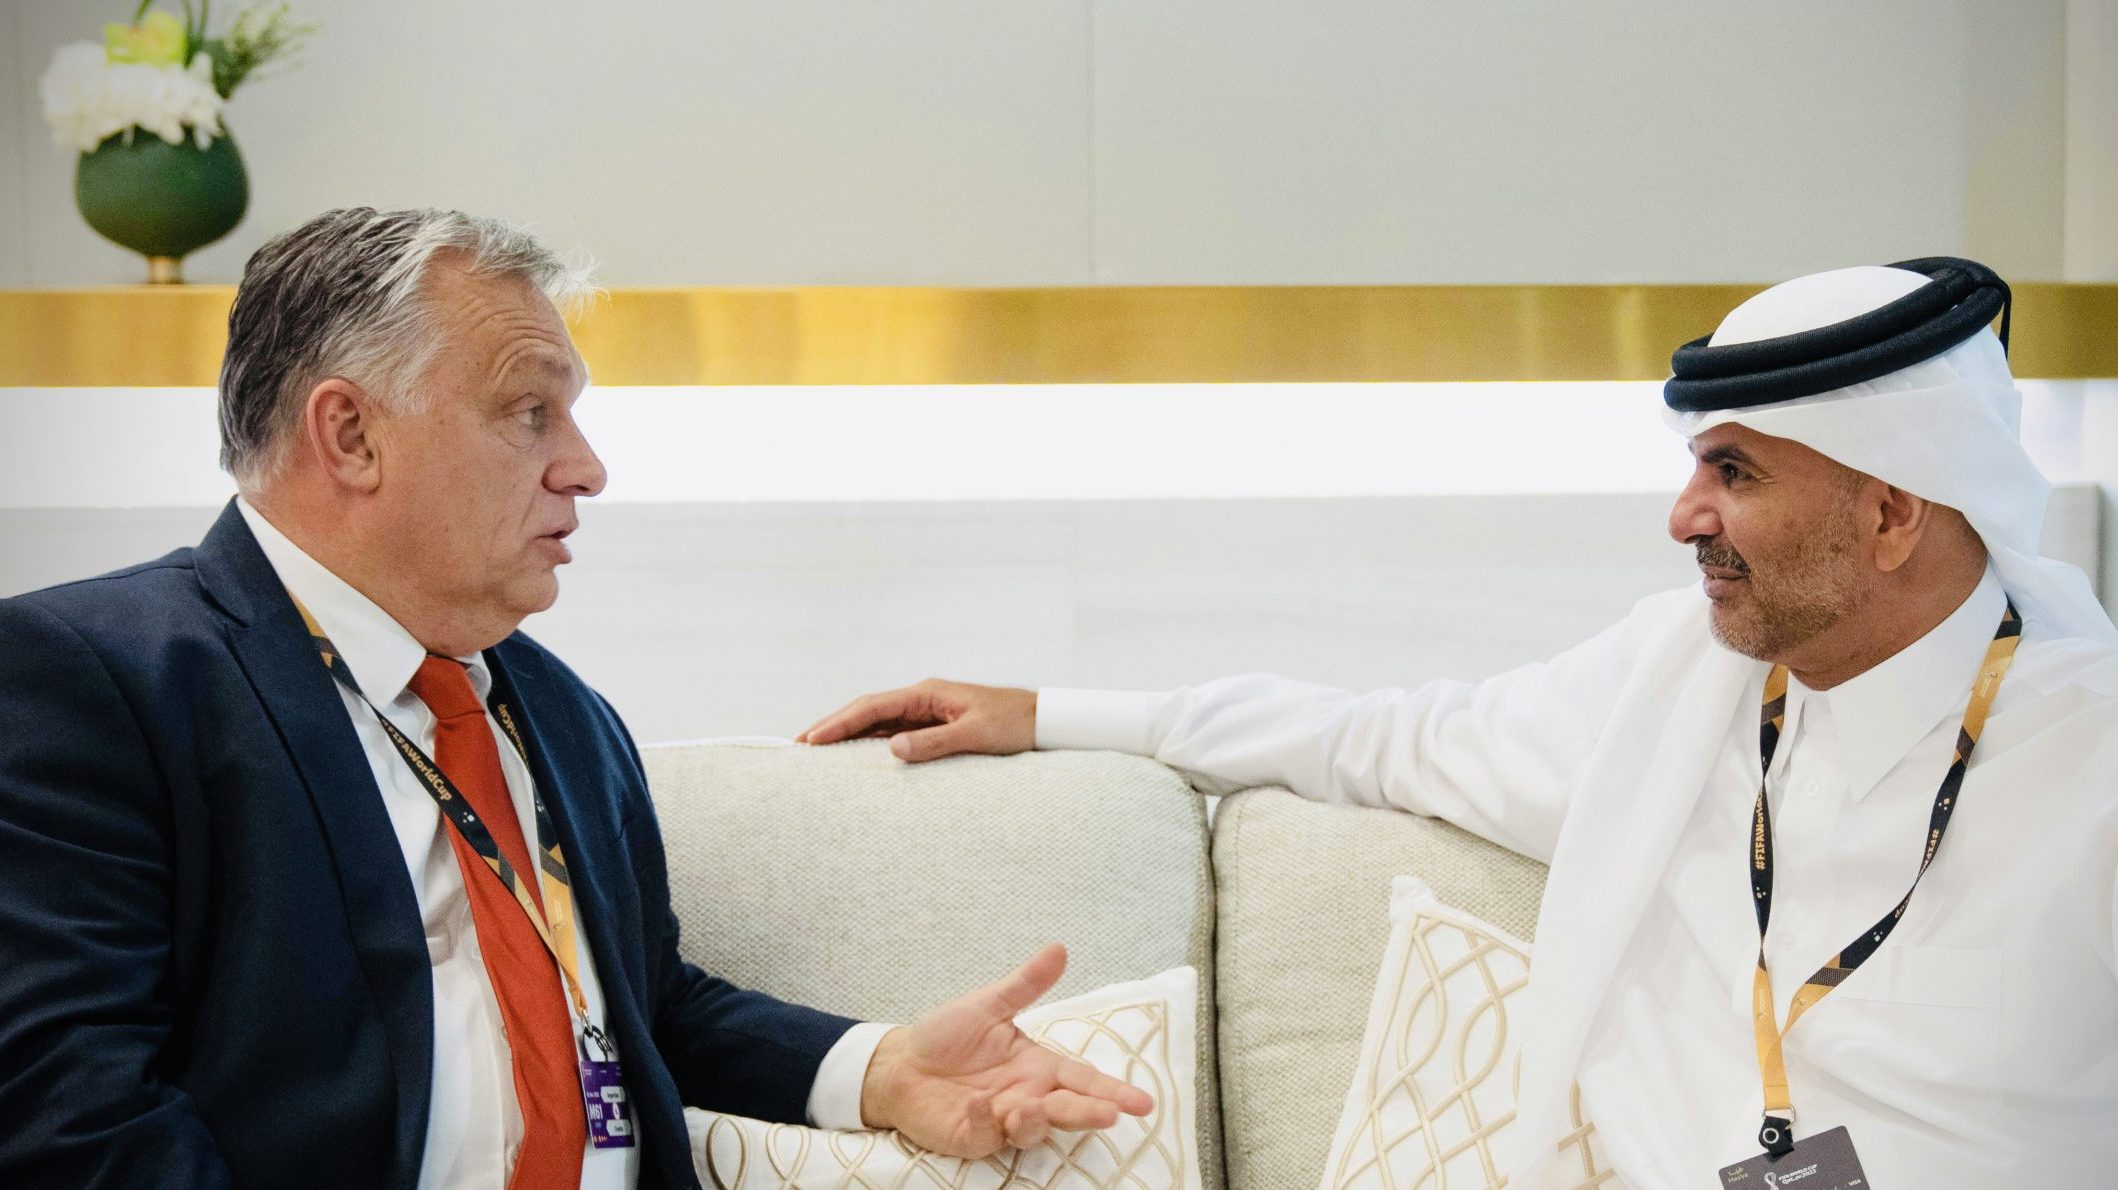 Viktor Orbán Arrives in Brussels after Quick Visit to Qatar